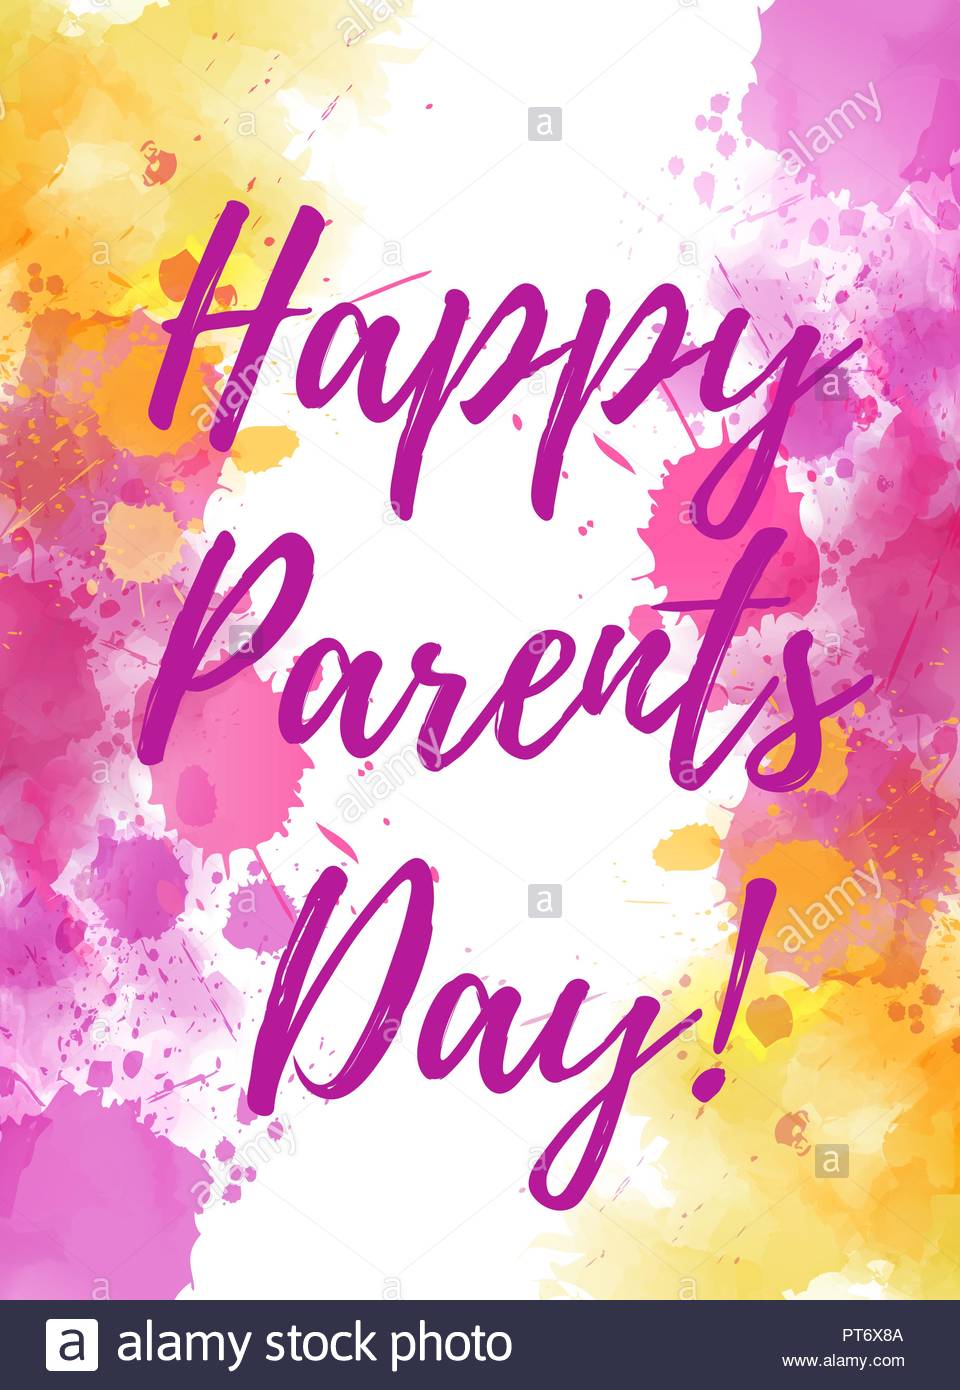 Happy Parents Day Holiday Background With Abstract Watercolor